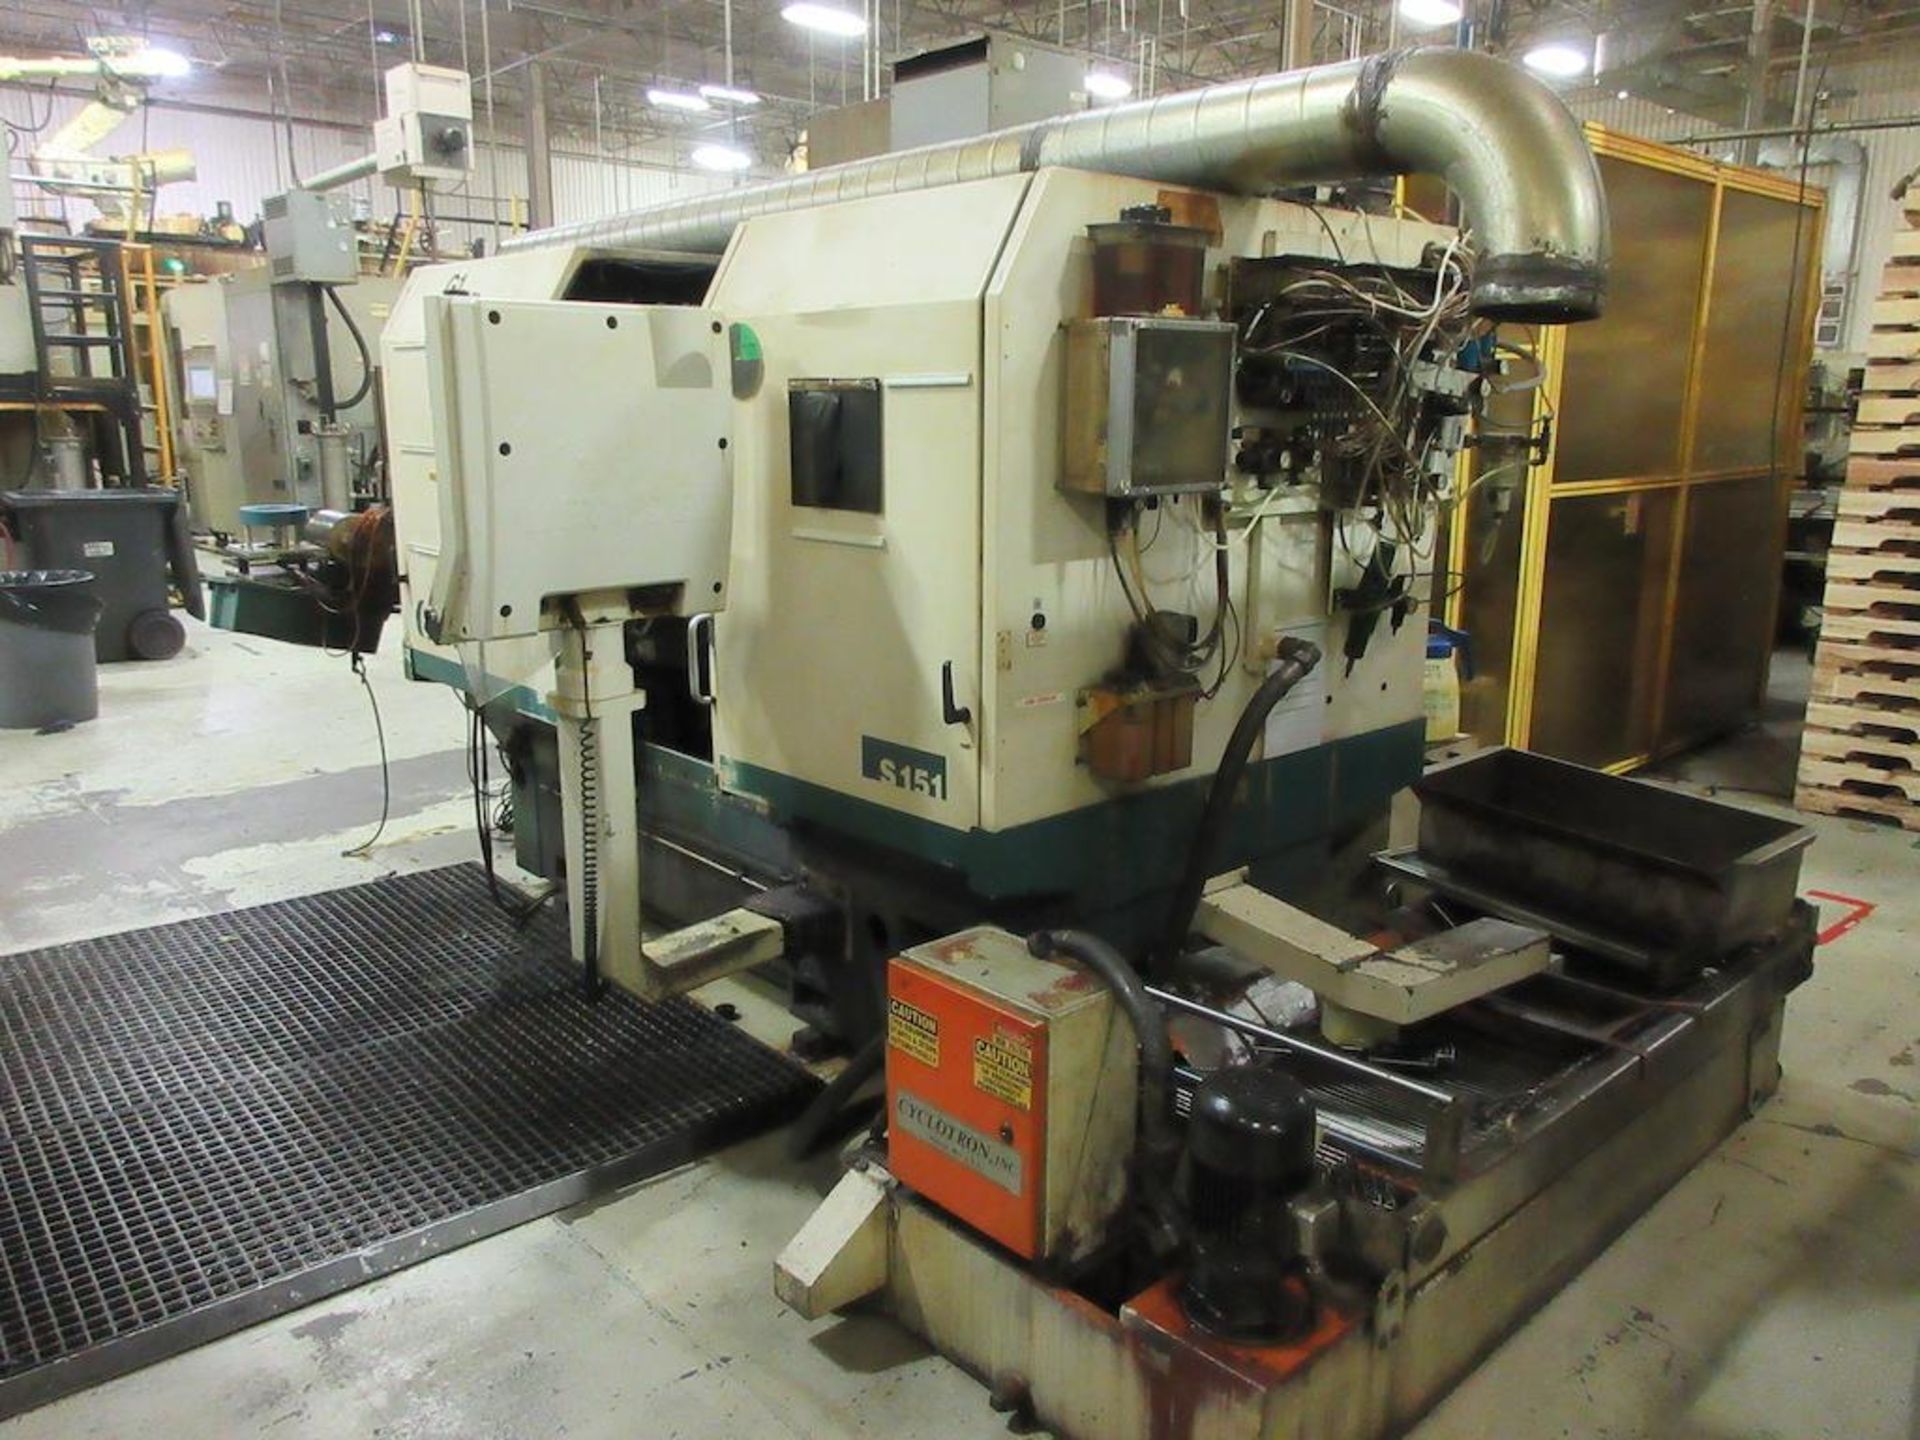 2006 STUDER, CNC Grinders, Model S151, High Frequency Drive Spindle, Swing diameter 14.17", center - Image 6 of 9